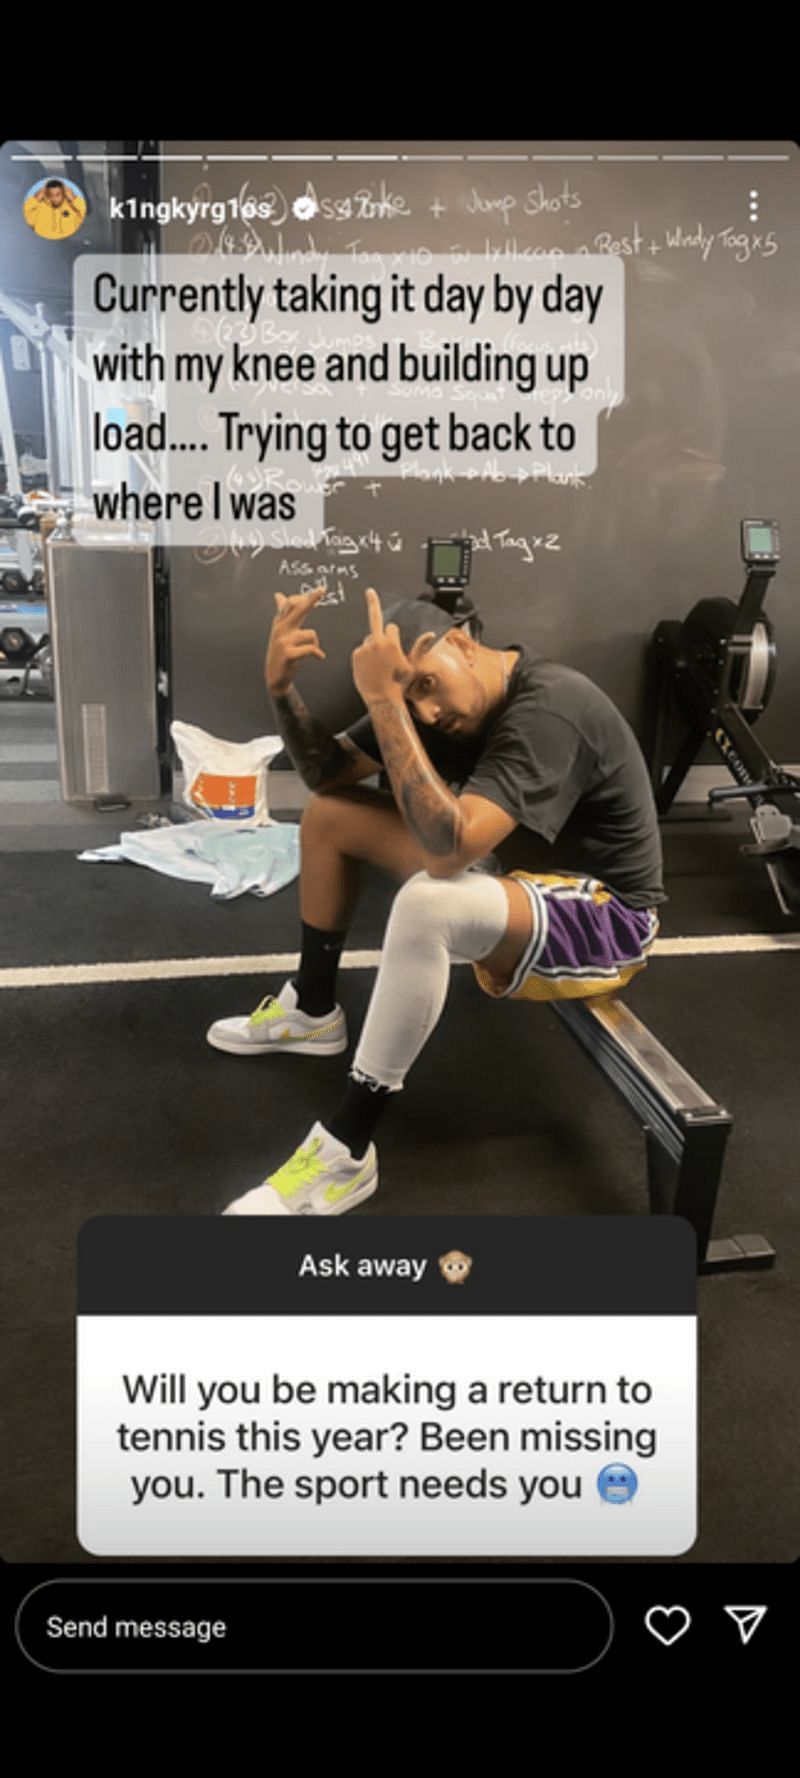 Kyrgios updates fans about his recovery